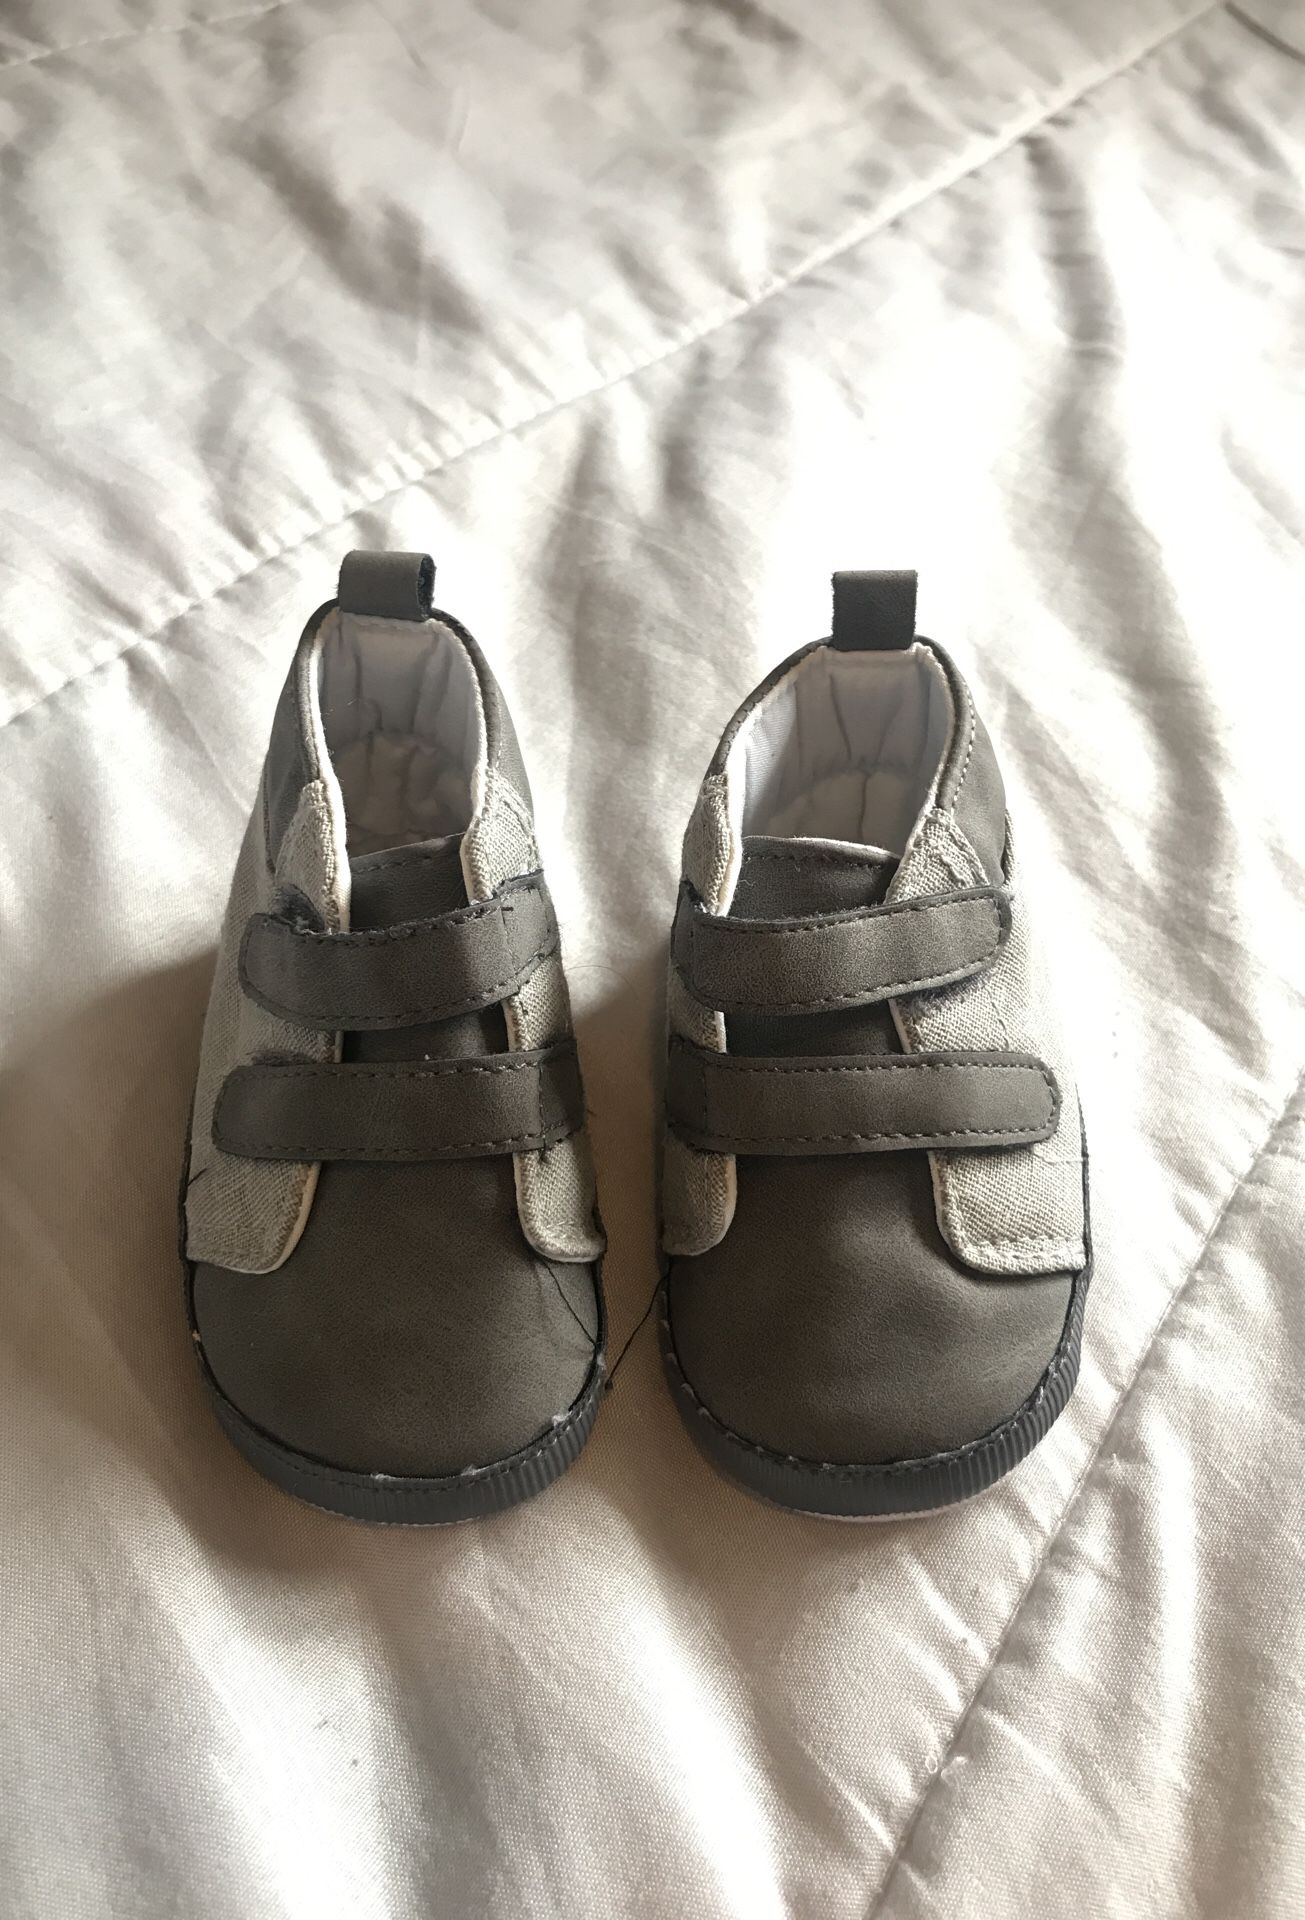 Baby infant crib shoes size 2